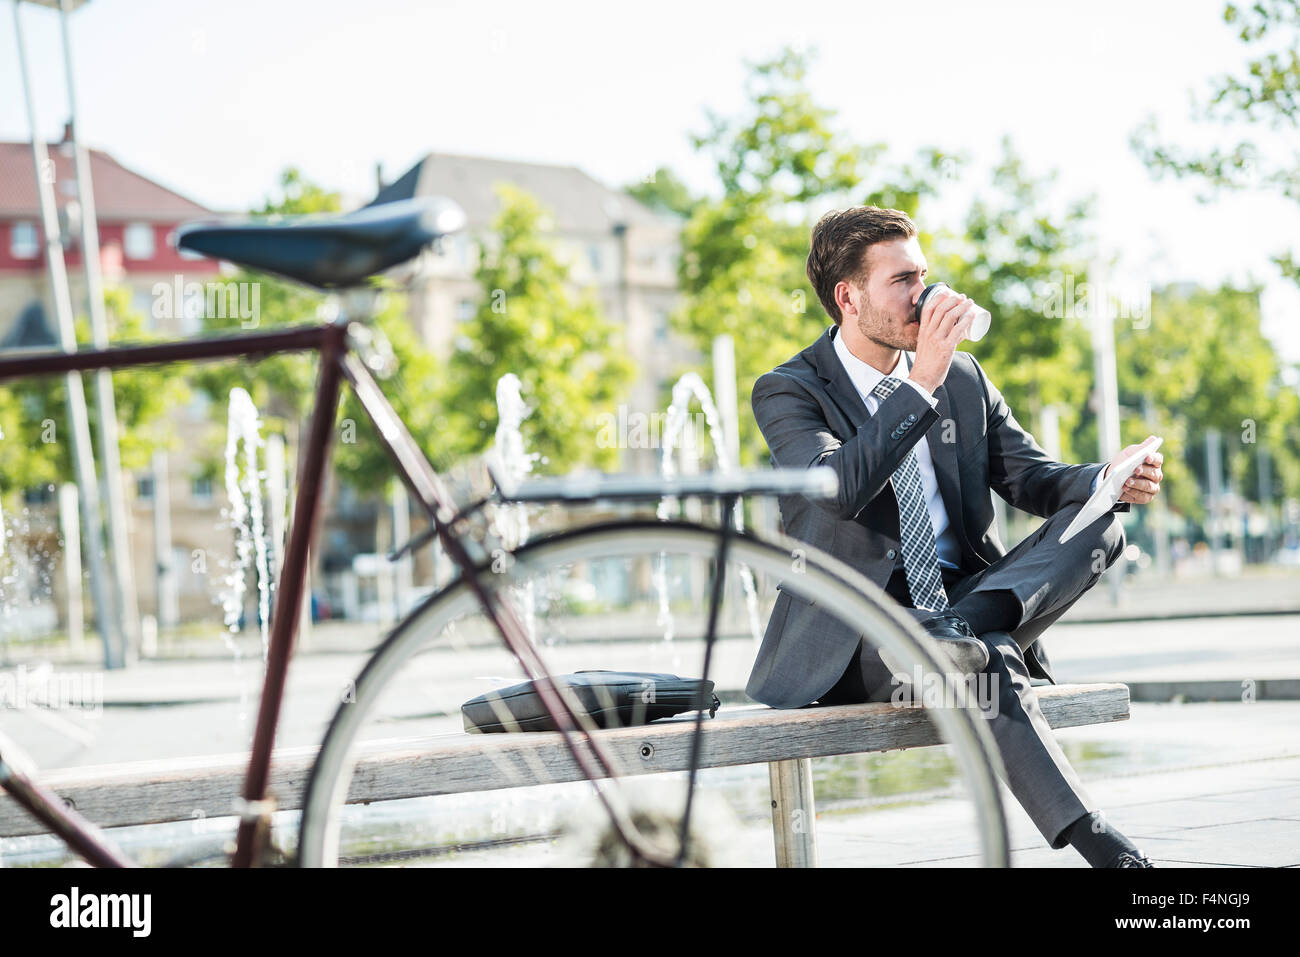 Young businessman sitting on bench using digital tablet Stock Photo